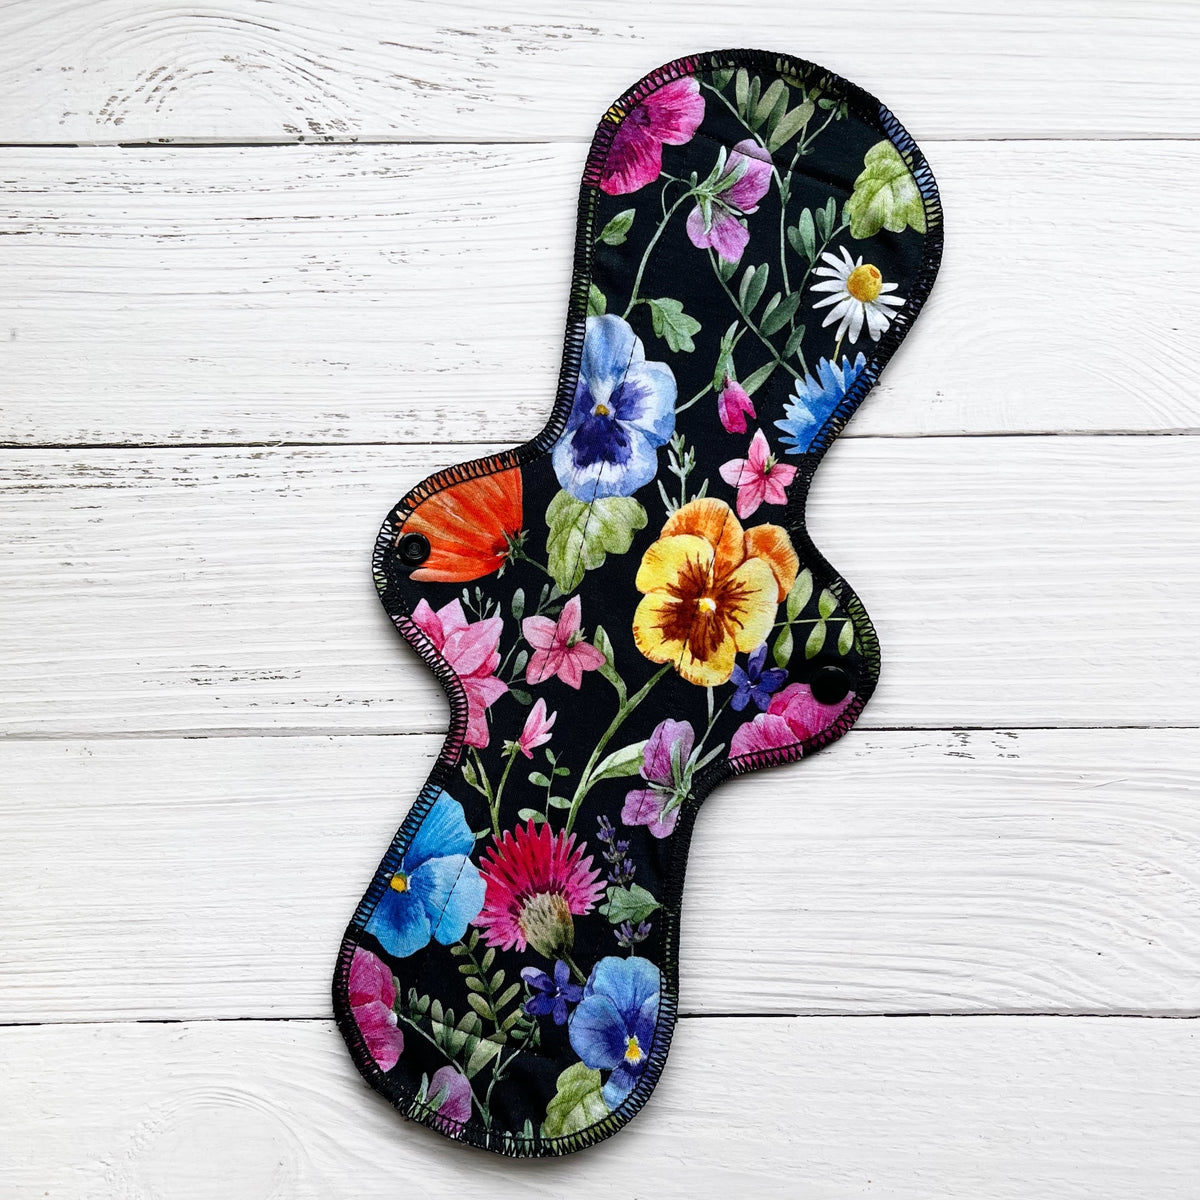 14 inch reusable pad with a bold pansy on black print on a rustic wood background